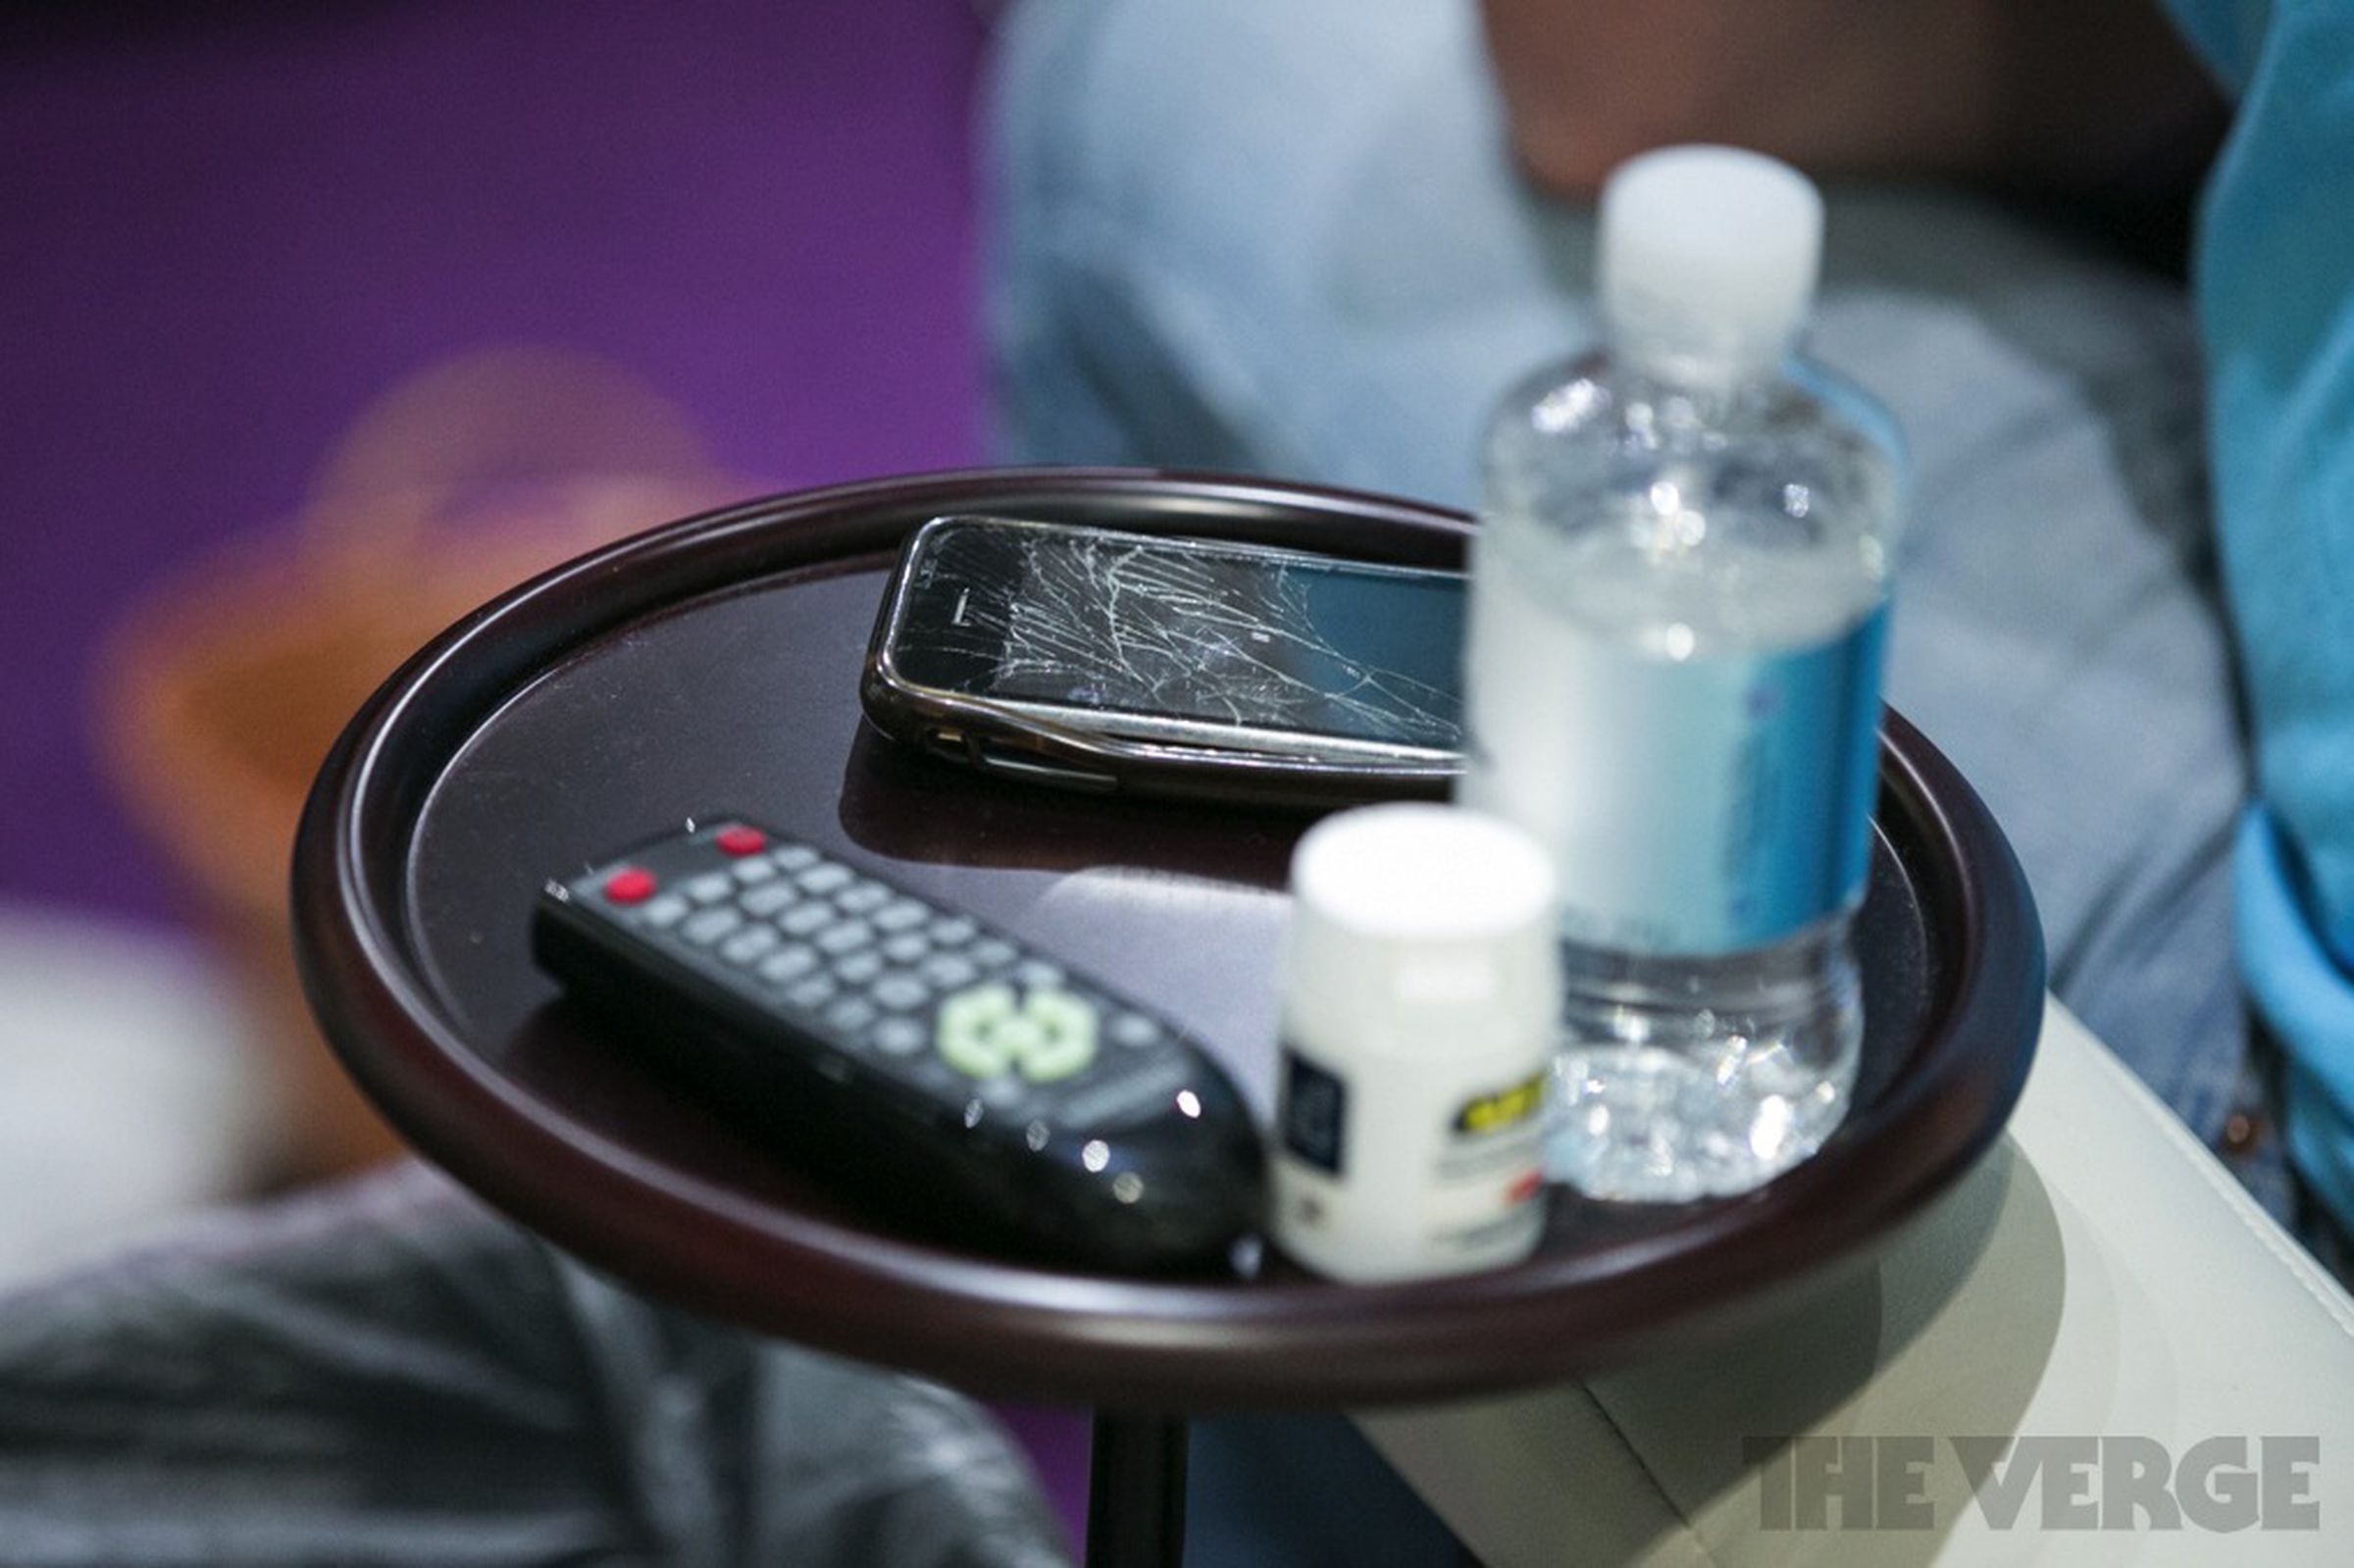 Tivo's record TV binge-watching session at CES 2014